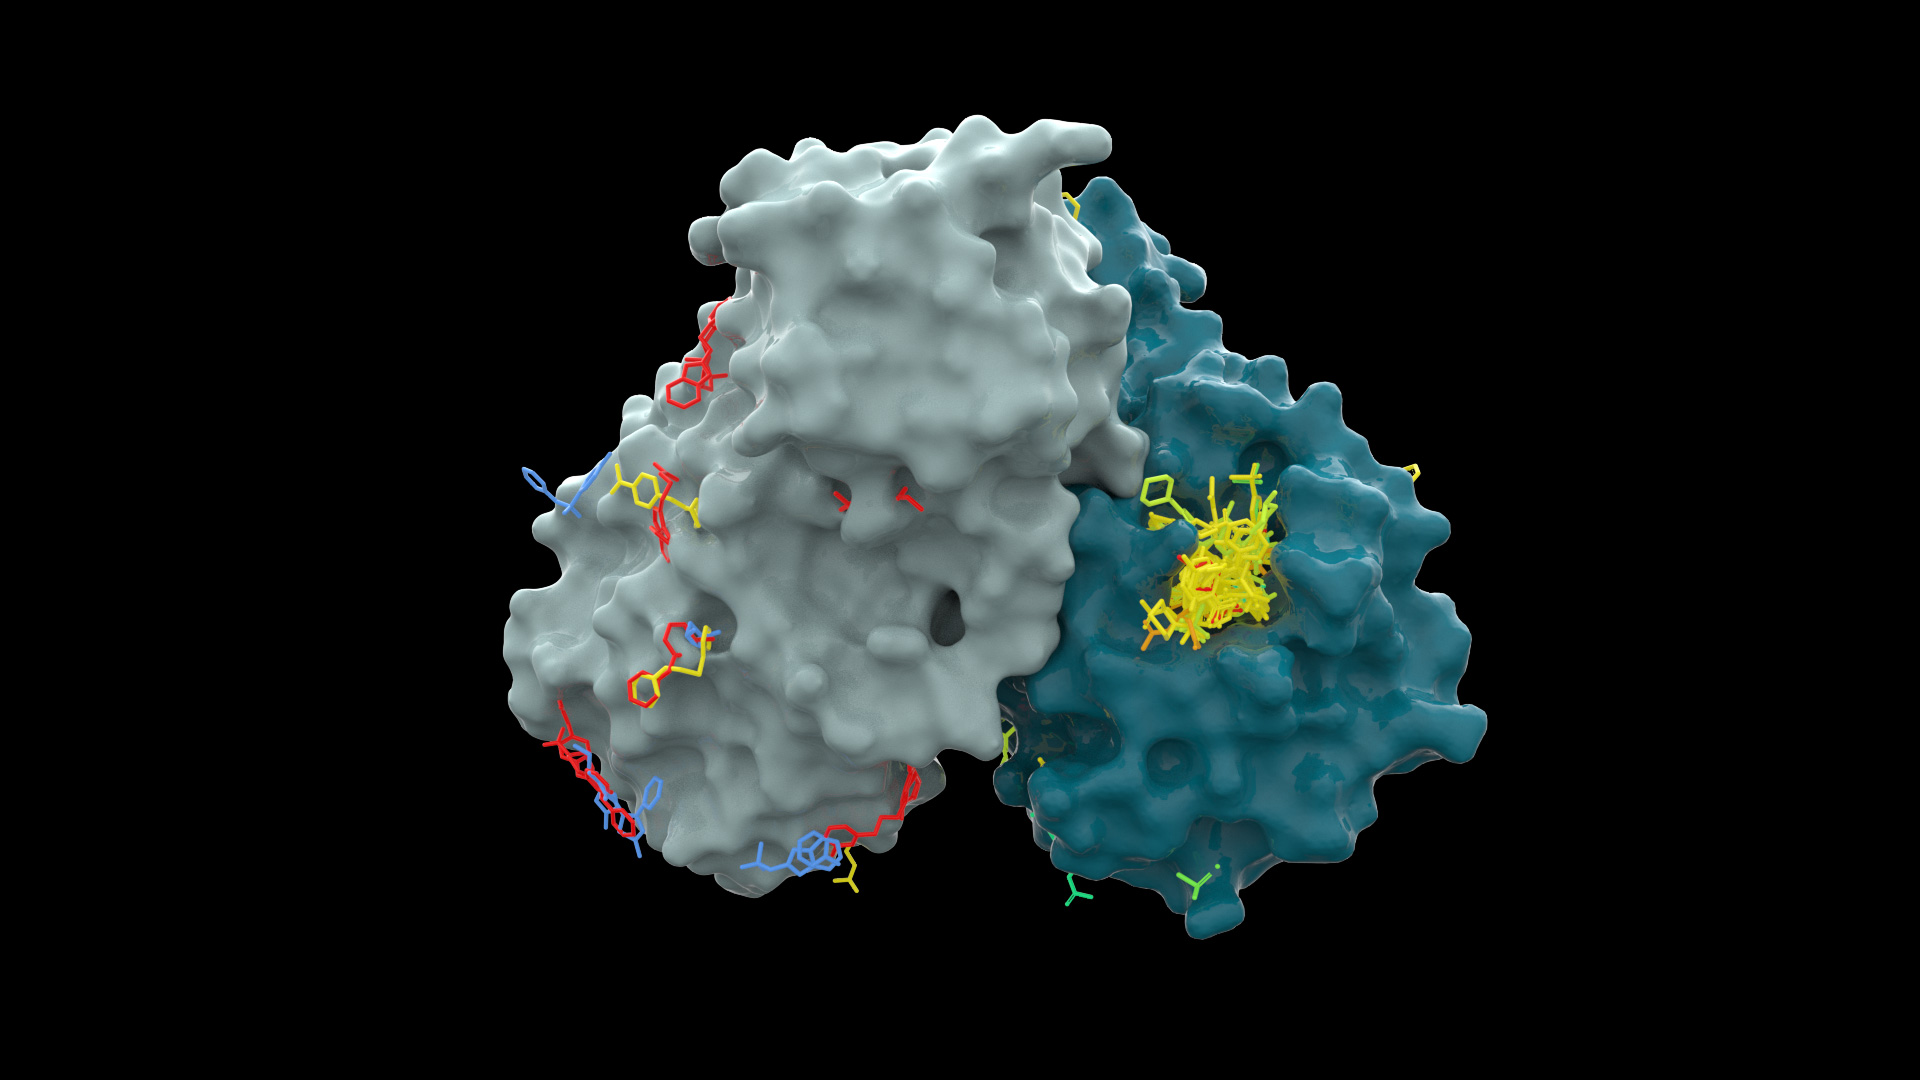 (Molecular) view of a key component of the SARS-CoV-2 virus called MPro (Green Grey) with drug site targets identified (yellow)